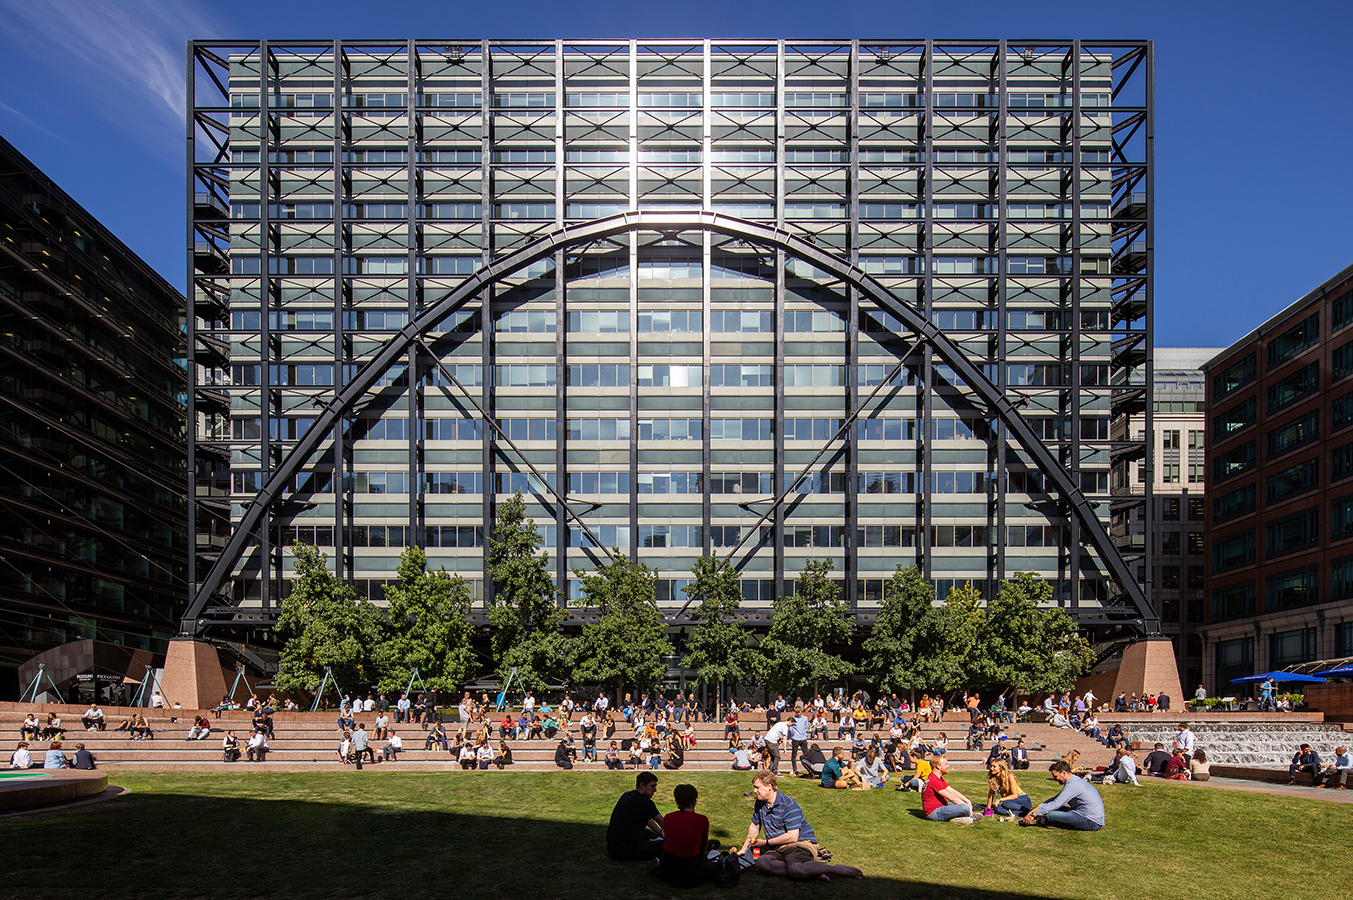 Exchange House, Broadgate. A grassy area in front of a large modern building black